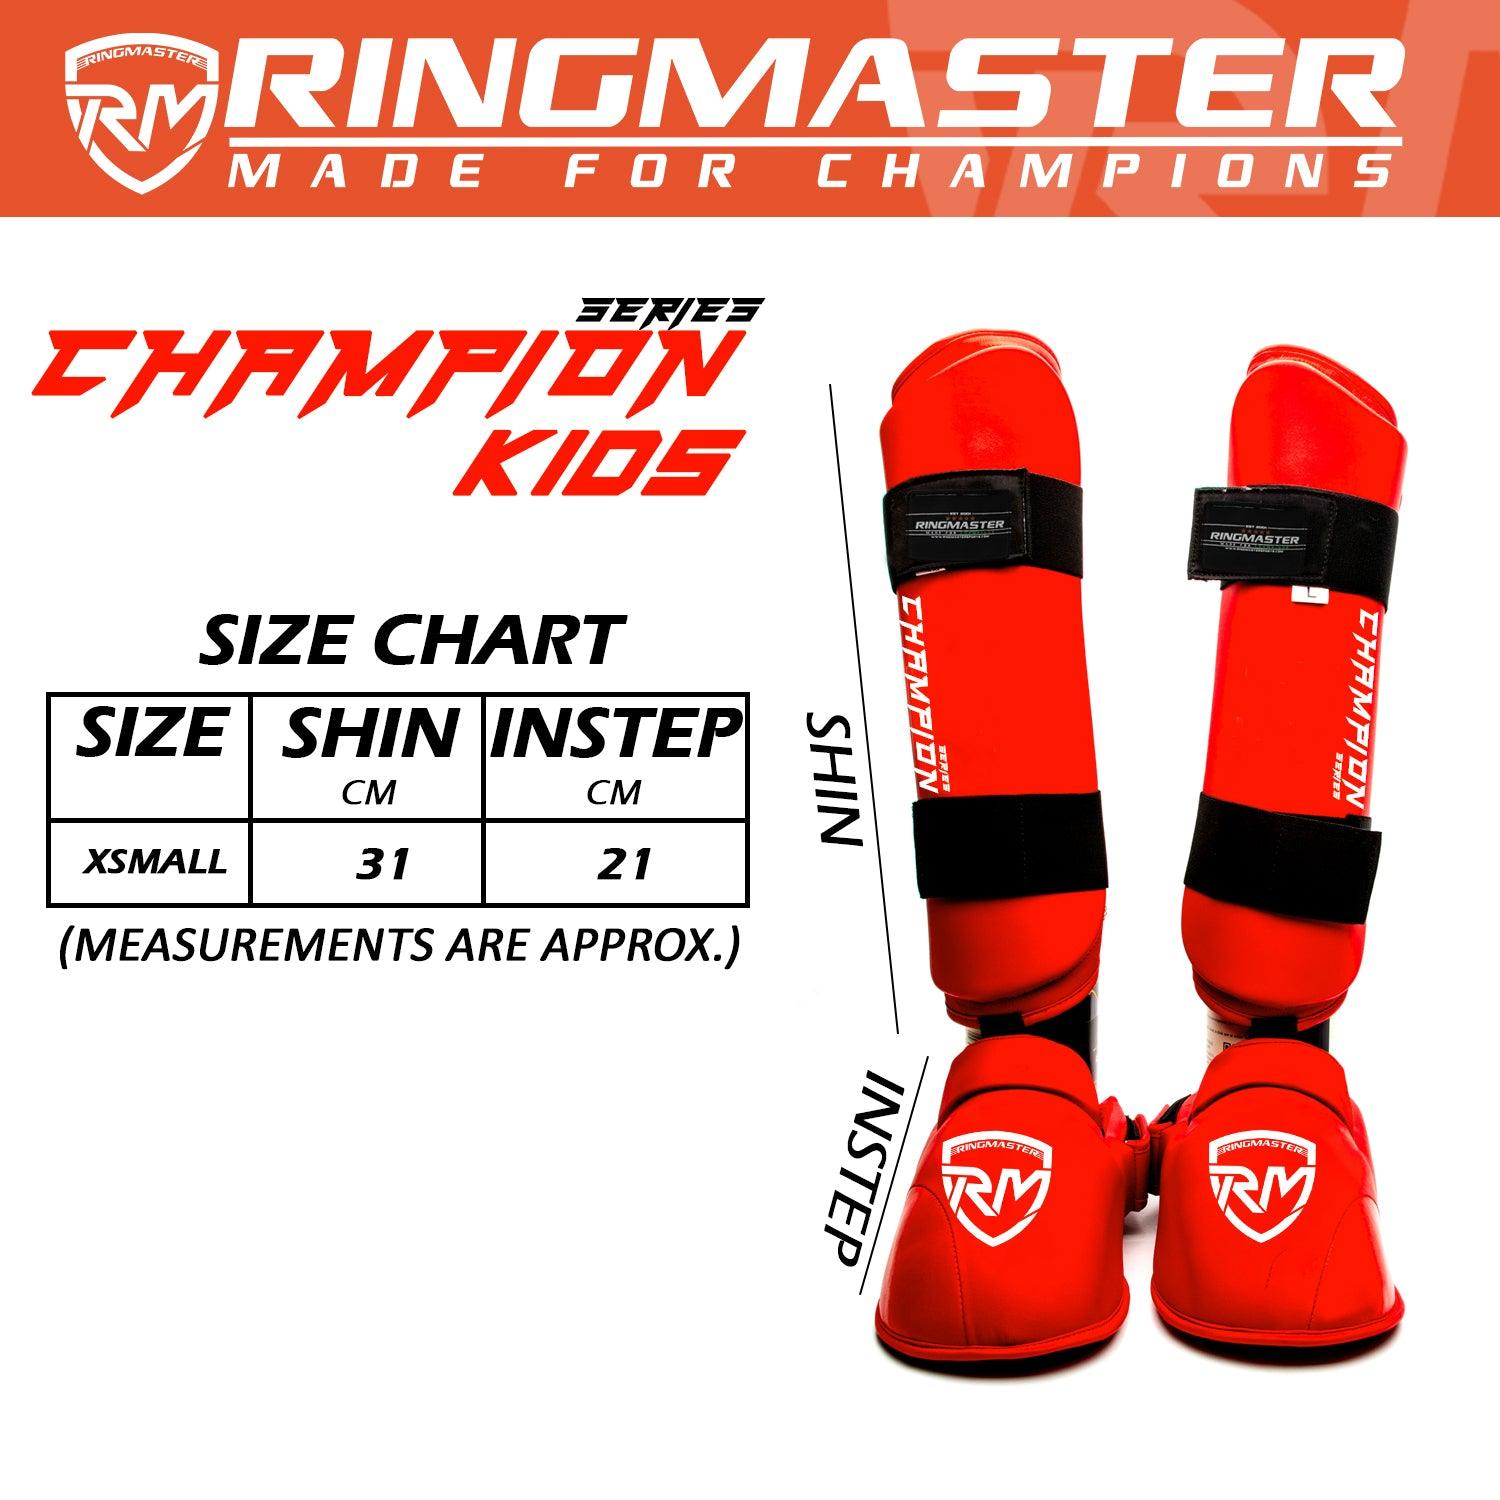 RingMaster Sports Synthetic Leather WKF Styled Kids Karate Shin Instep Guards Red martial arts image 4